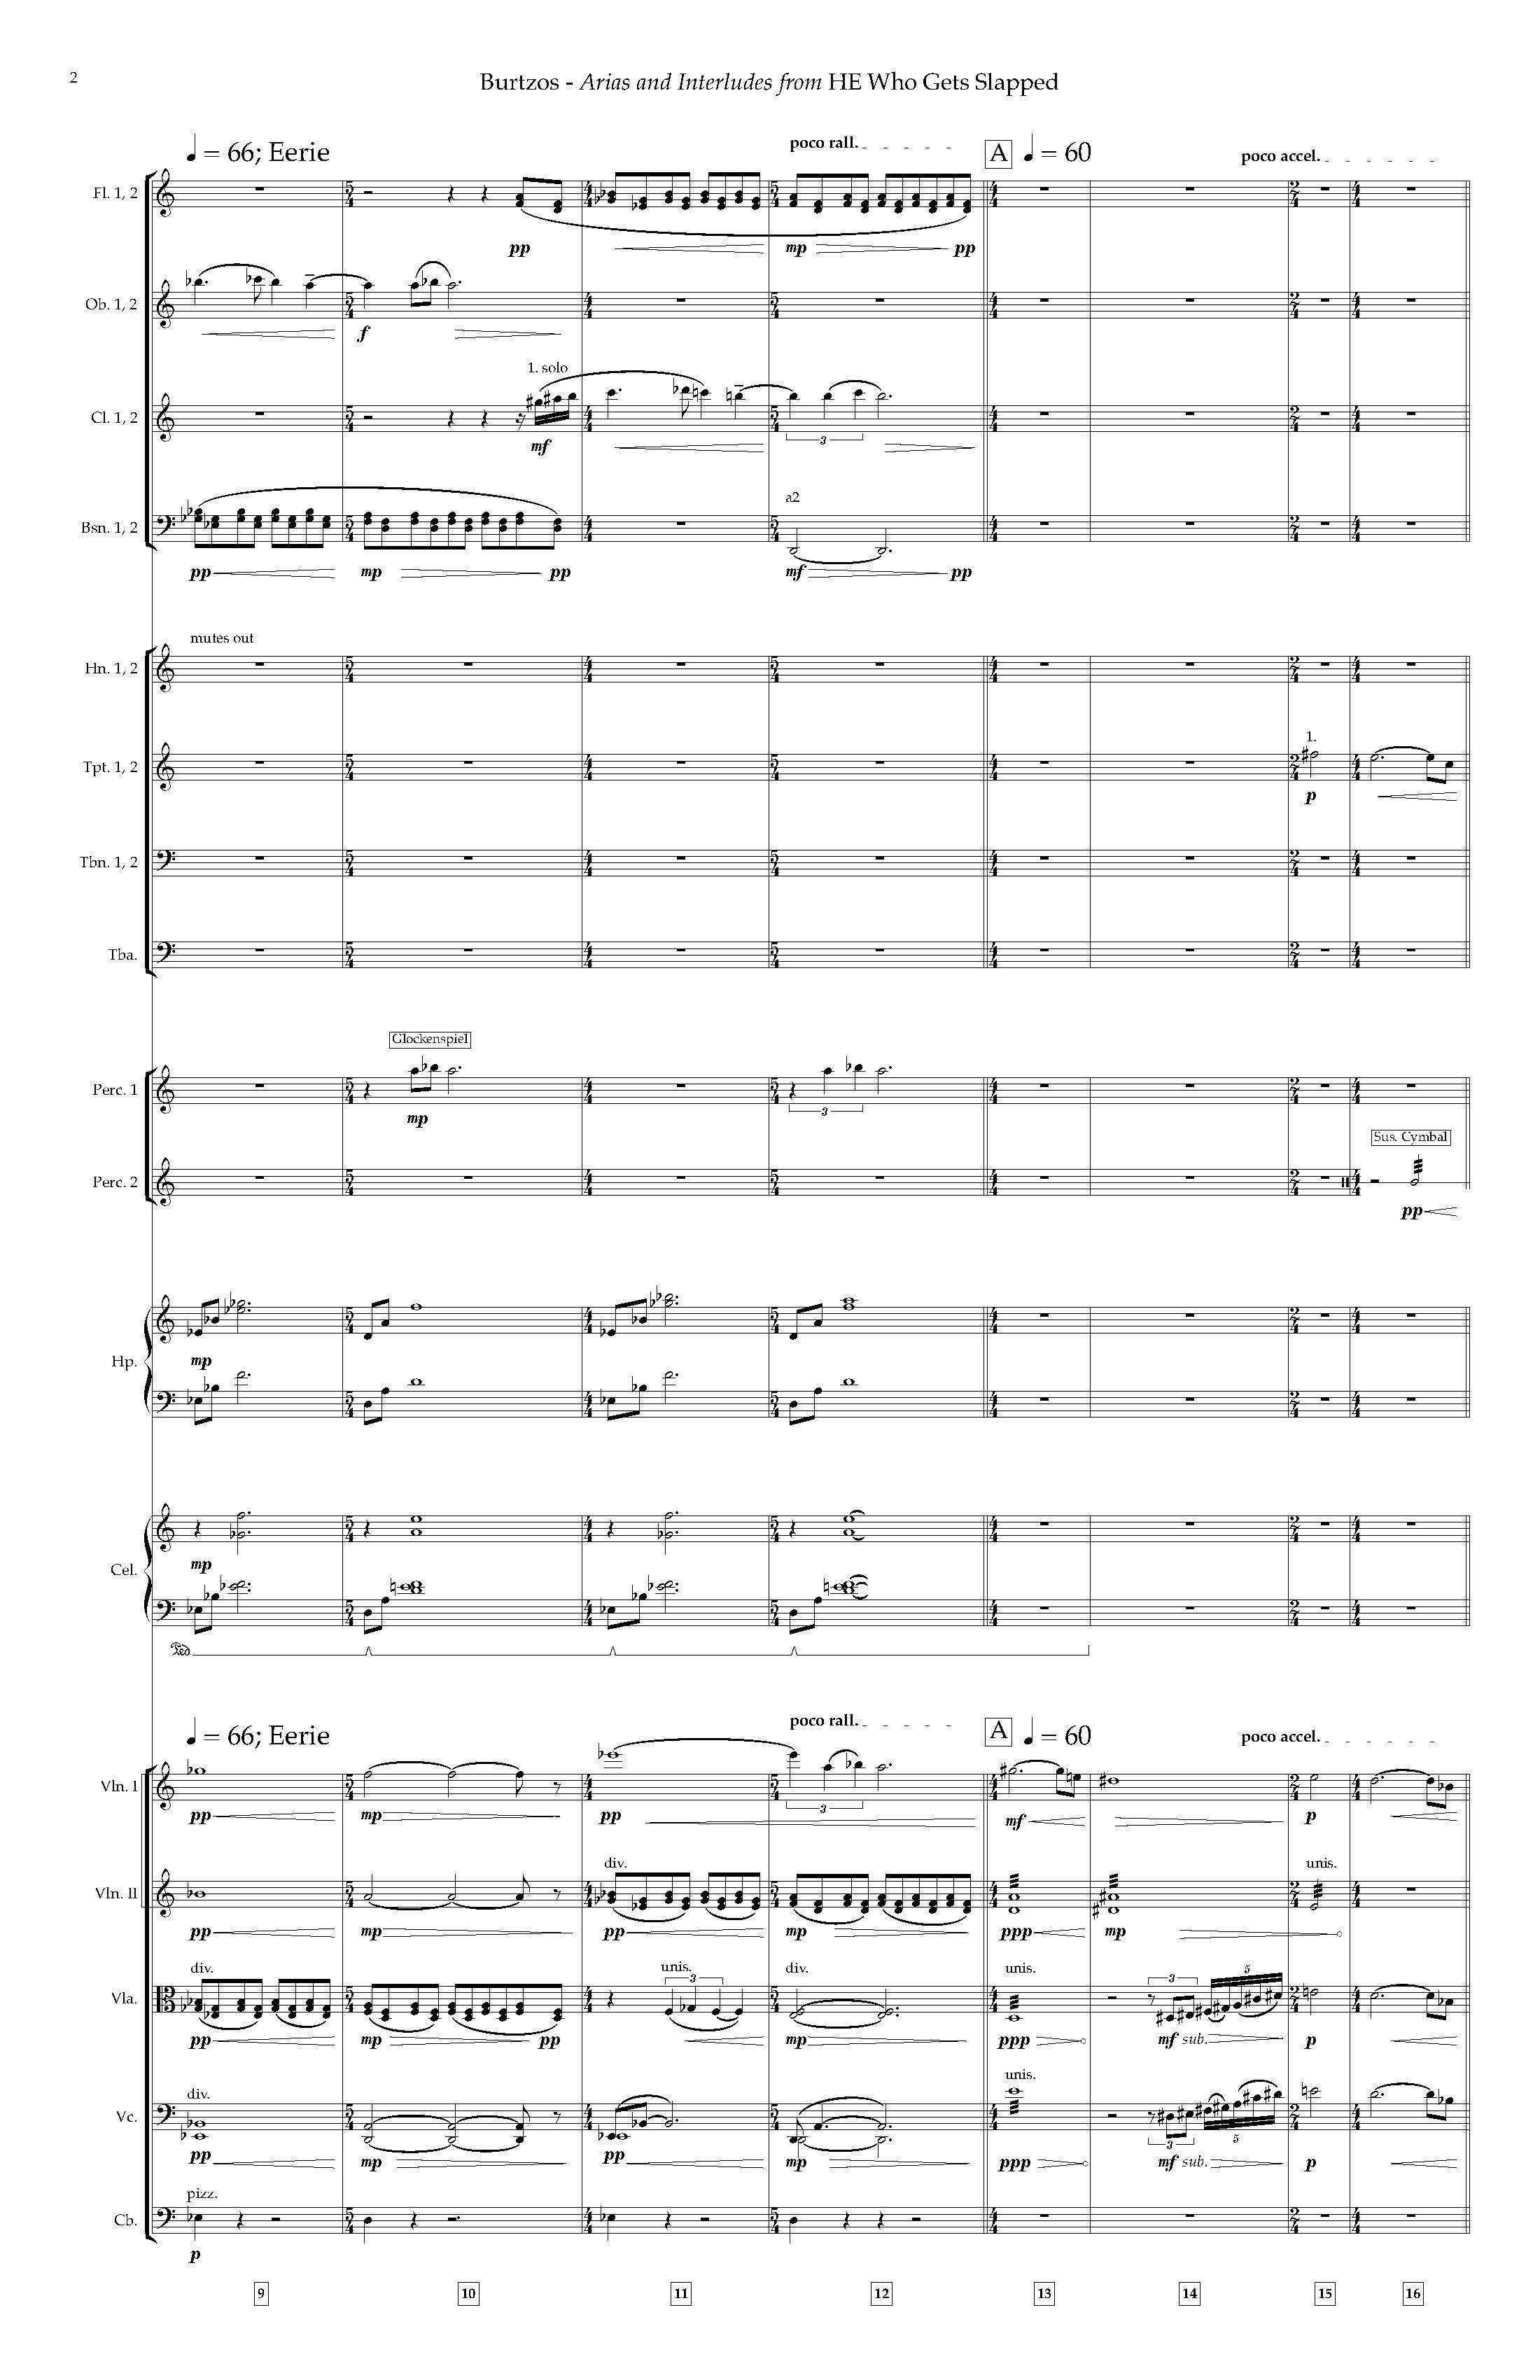 Arias and Interludes from HWGS - Complete Score_Page_08.jpg